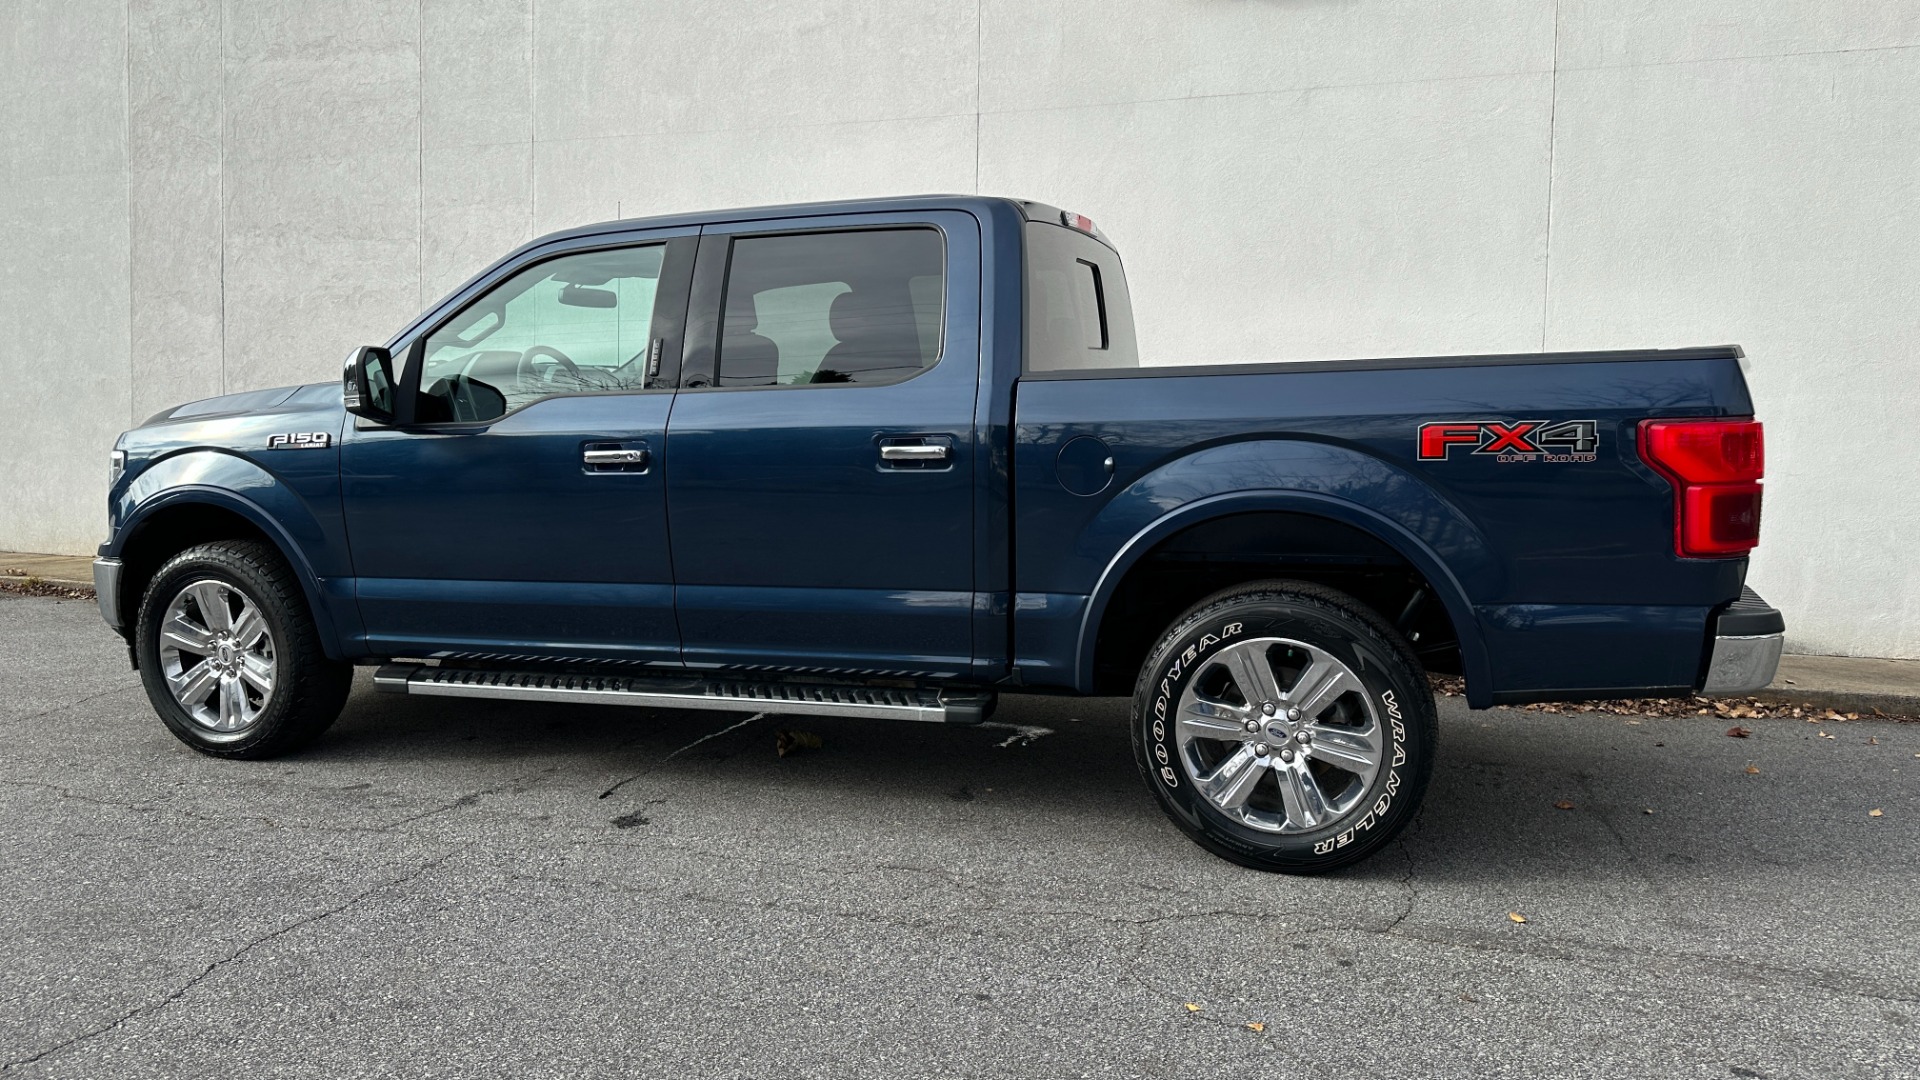 Used 2020 Ford F-150 LARIAT / 3.5L ECOBOOST / FX4 OFFROAD / 20IN WHEELS / PANORAMIC ROOF for sale $45,995 at Formula Imports in Charlotte NC 28227 3